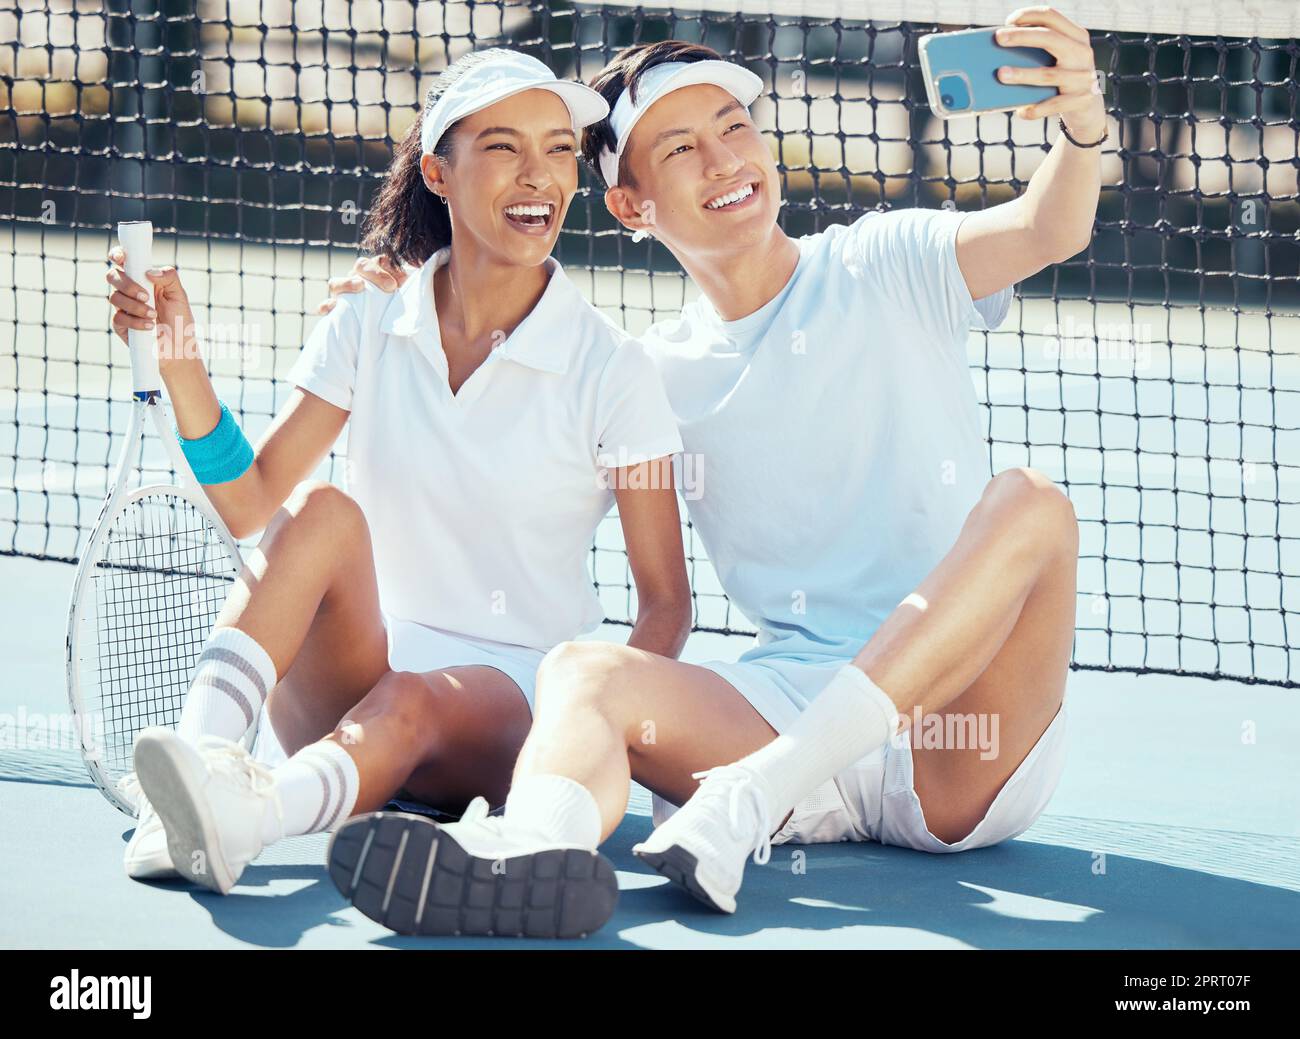 Selfie, sports or couple sitting on a tennis court resting after exercise, practice or training. Wellness, fitness or health with an interracial man and woman with sport racket taking a phone picture Stock Photo